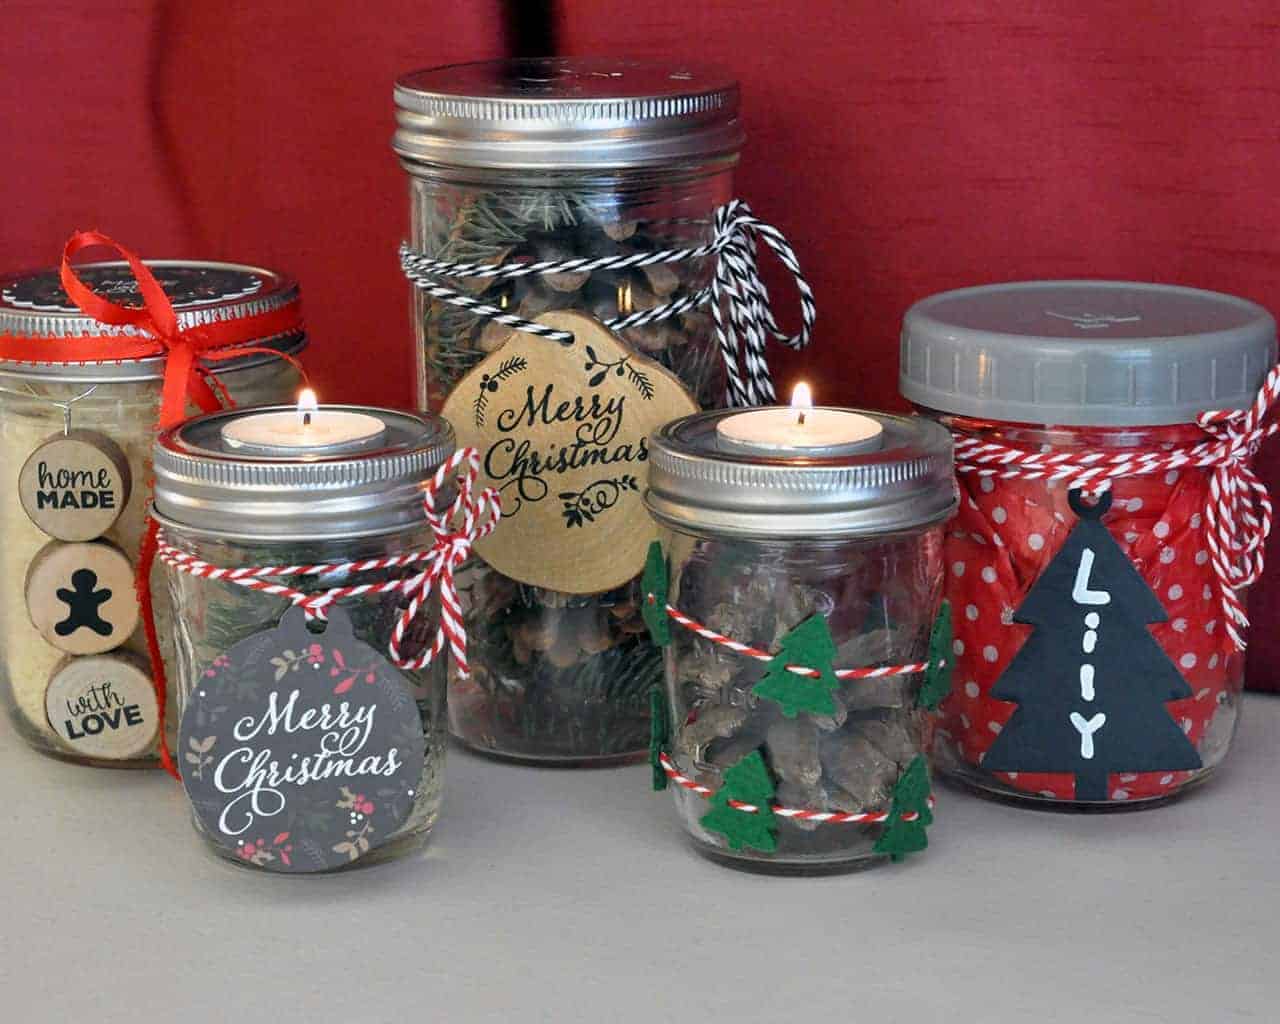 jar-jewelry-christmas-lids-inserts-tags-twine-mason-jars-tea-light-candle-decorated-gift-red